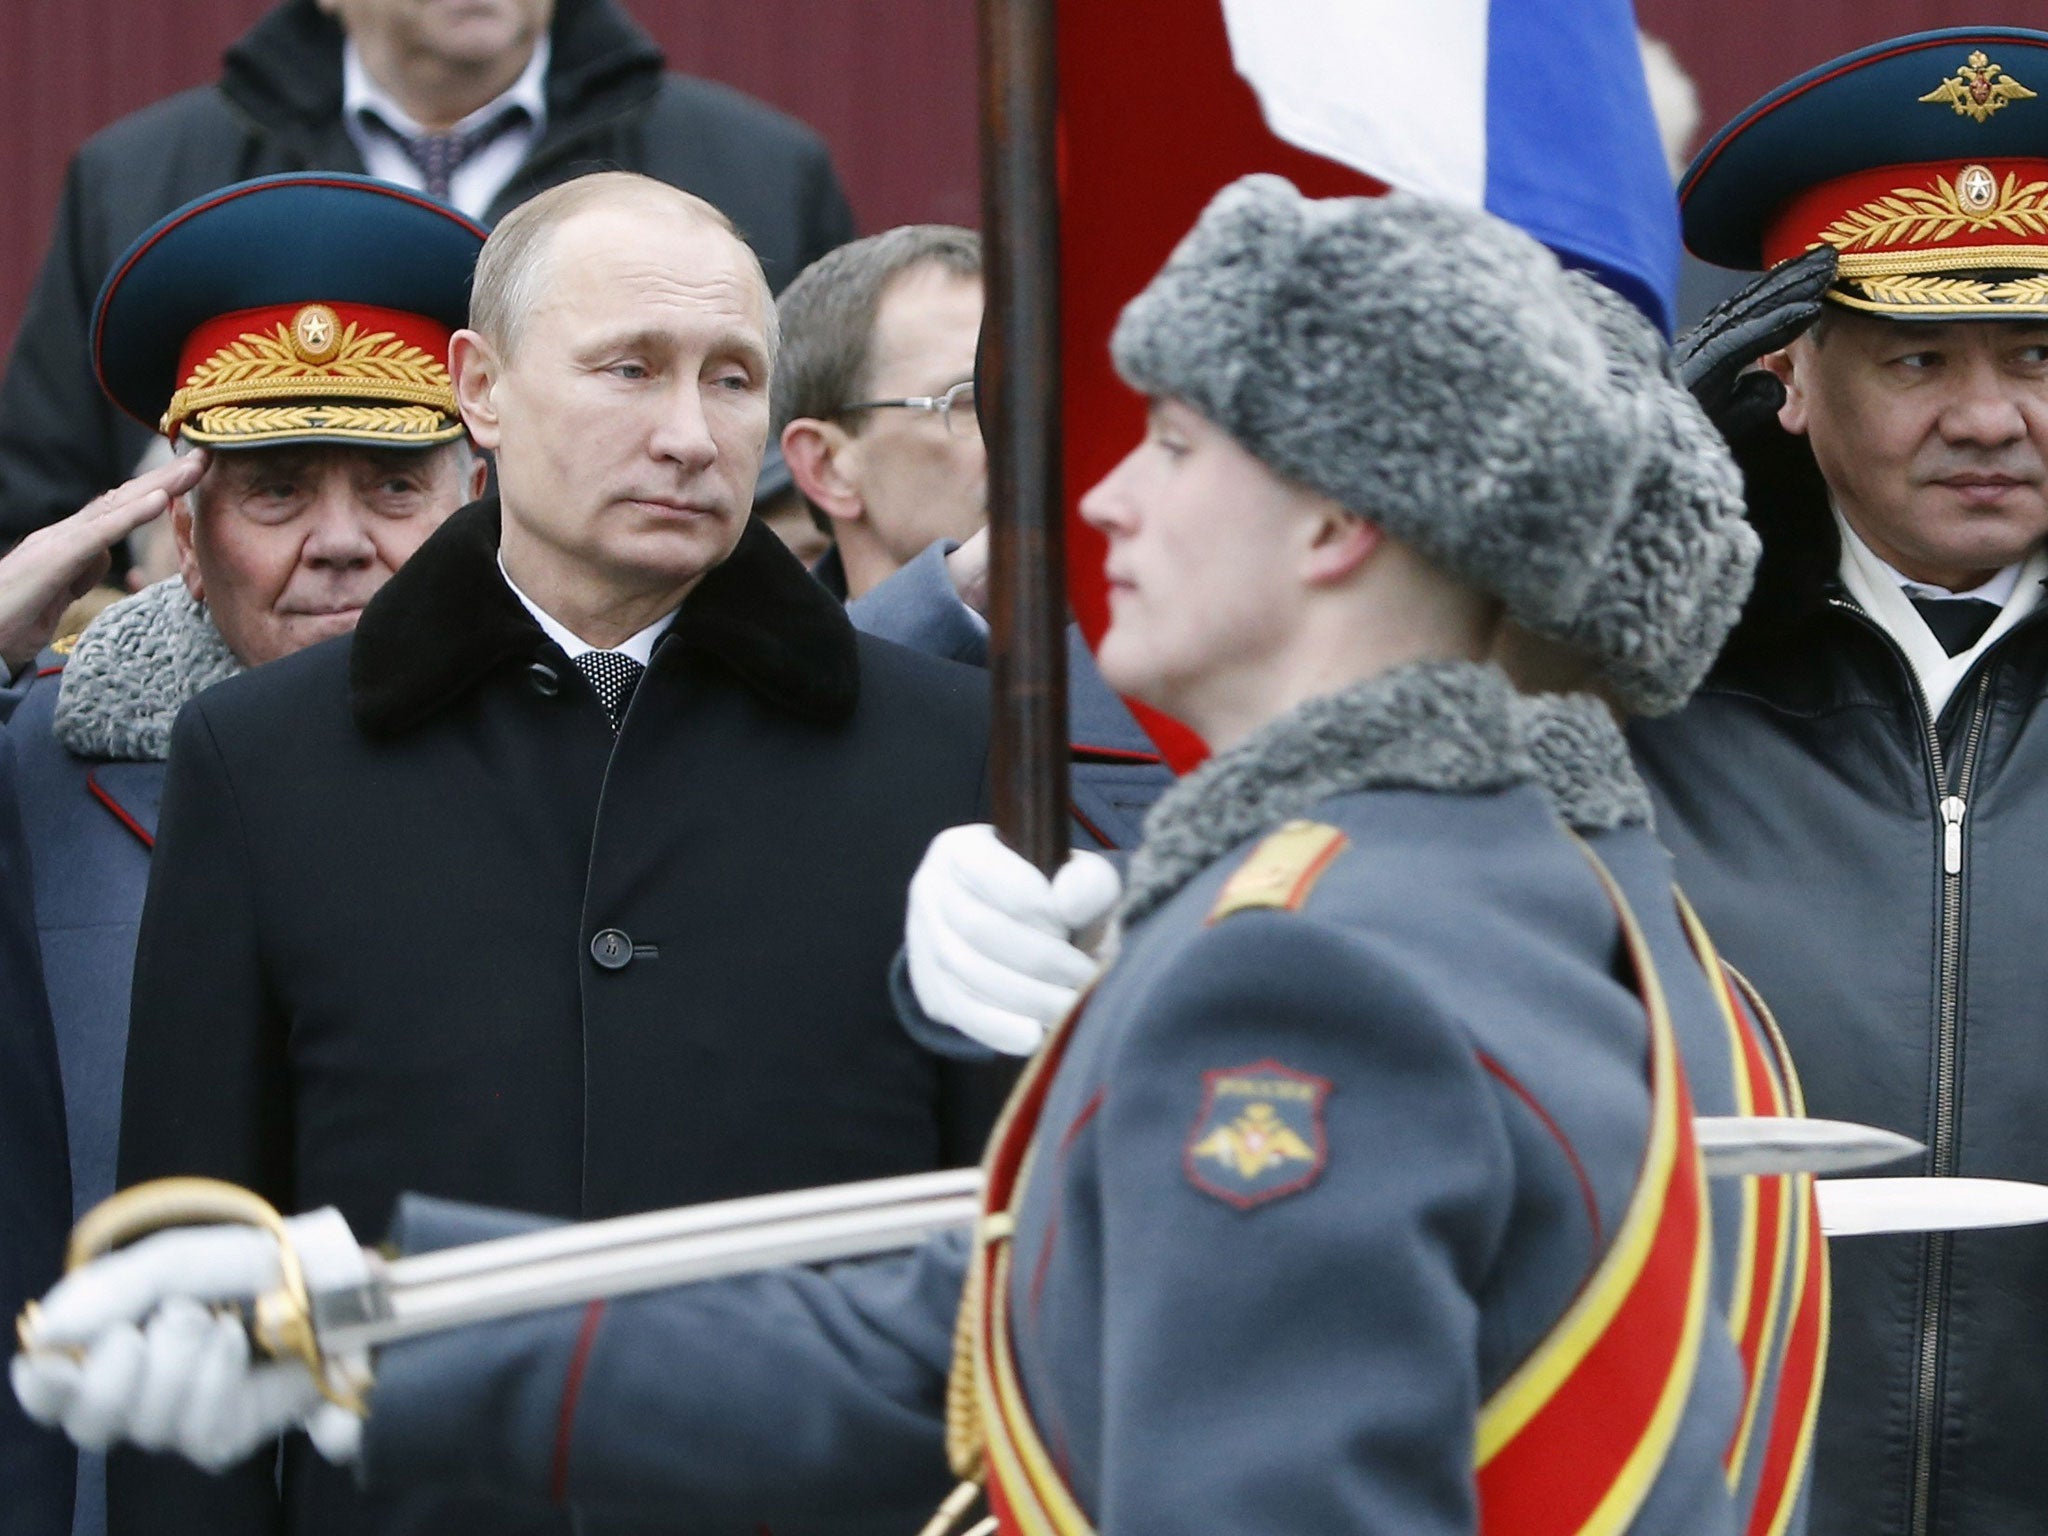 Russian President Vladimir Putin watches honor guards pass by as they attend a wreath laying ceremony to mark the Defender of the Fatherland Day at the Tomb of the Unknown Soldier in central Moscow, 23 Feb